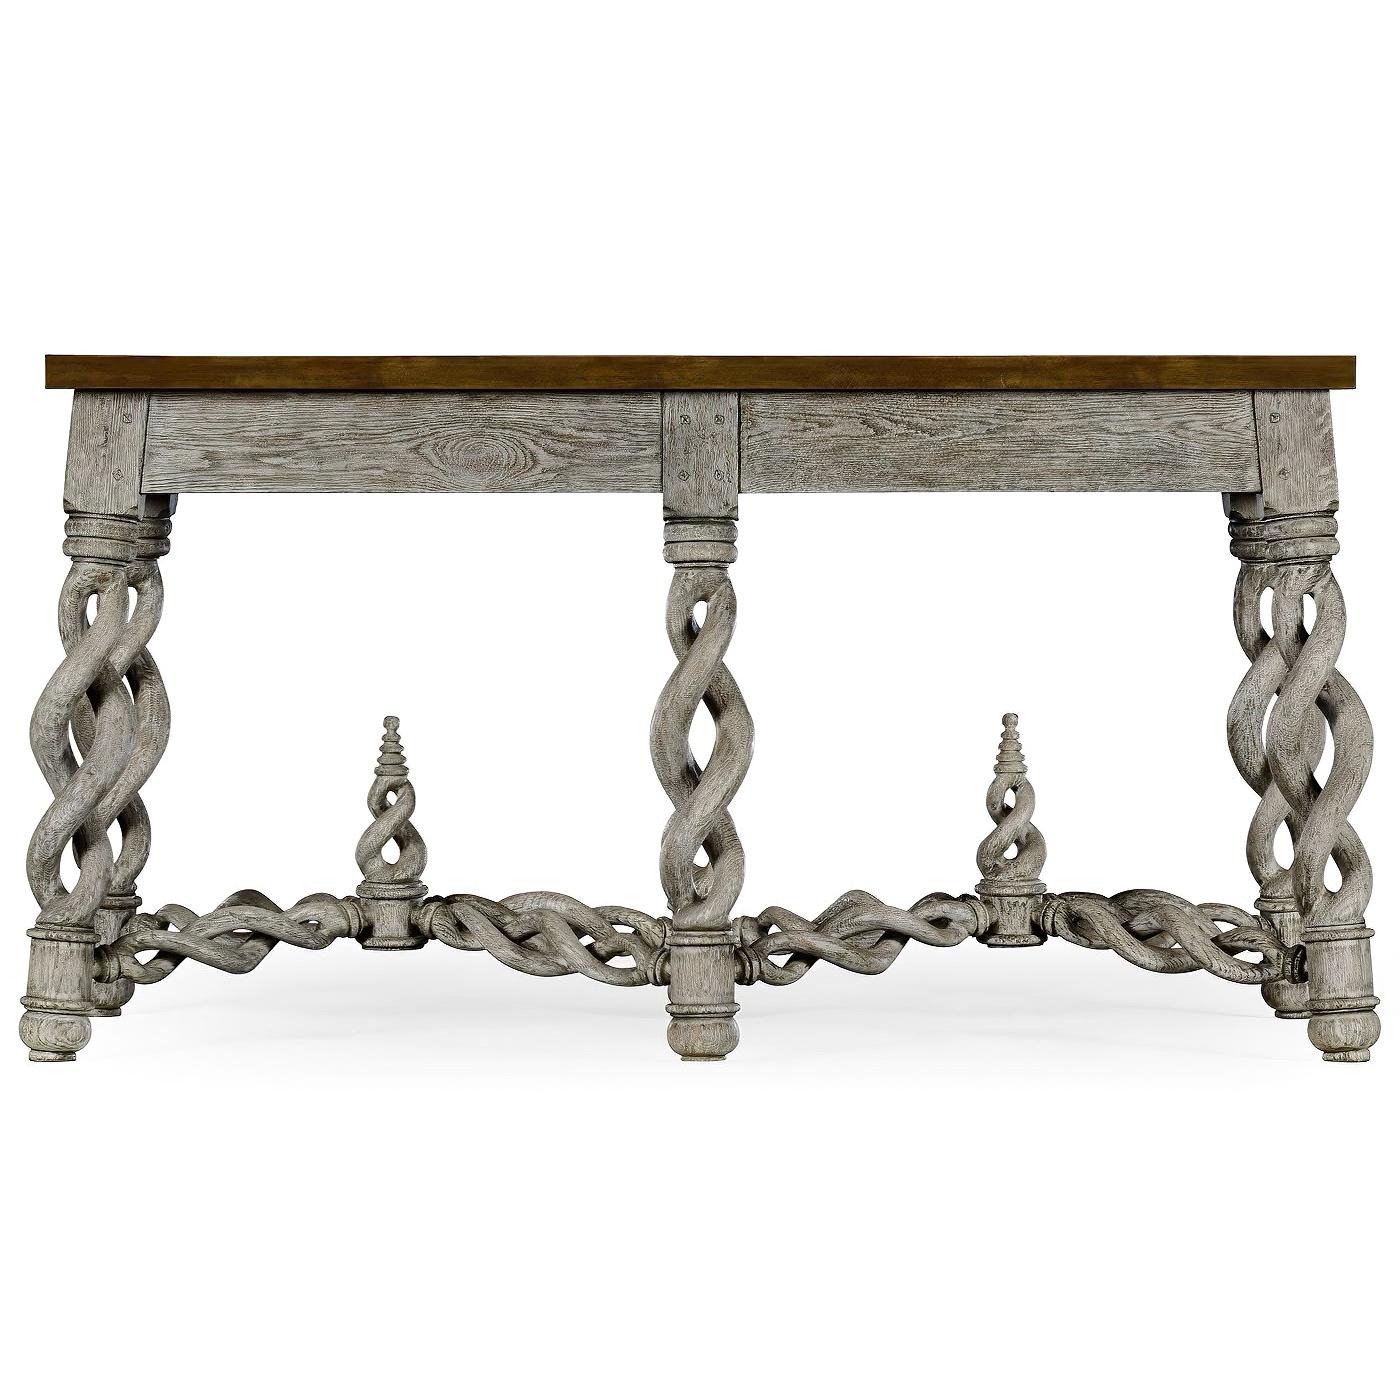 An unusual distressed grey oak brass banded marble-top console table with interwoven carved legs, and stretchers.
Dimensions: 67